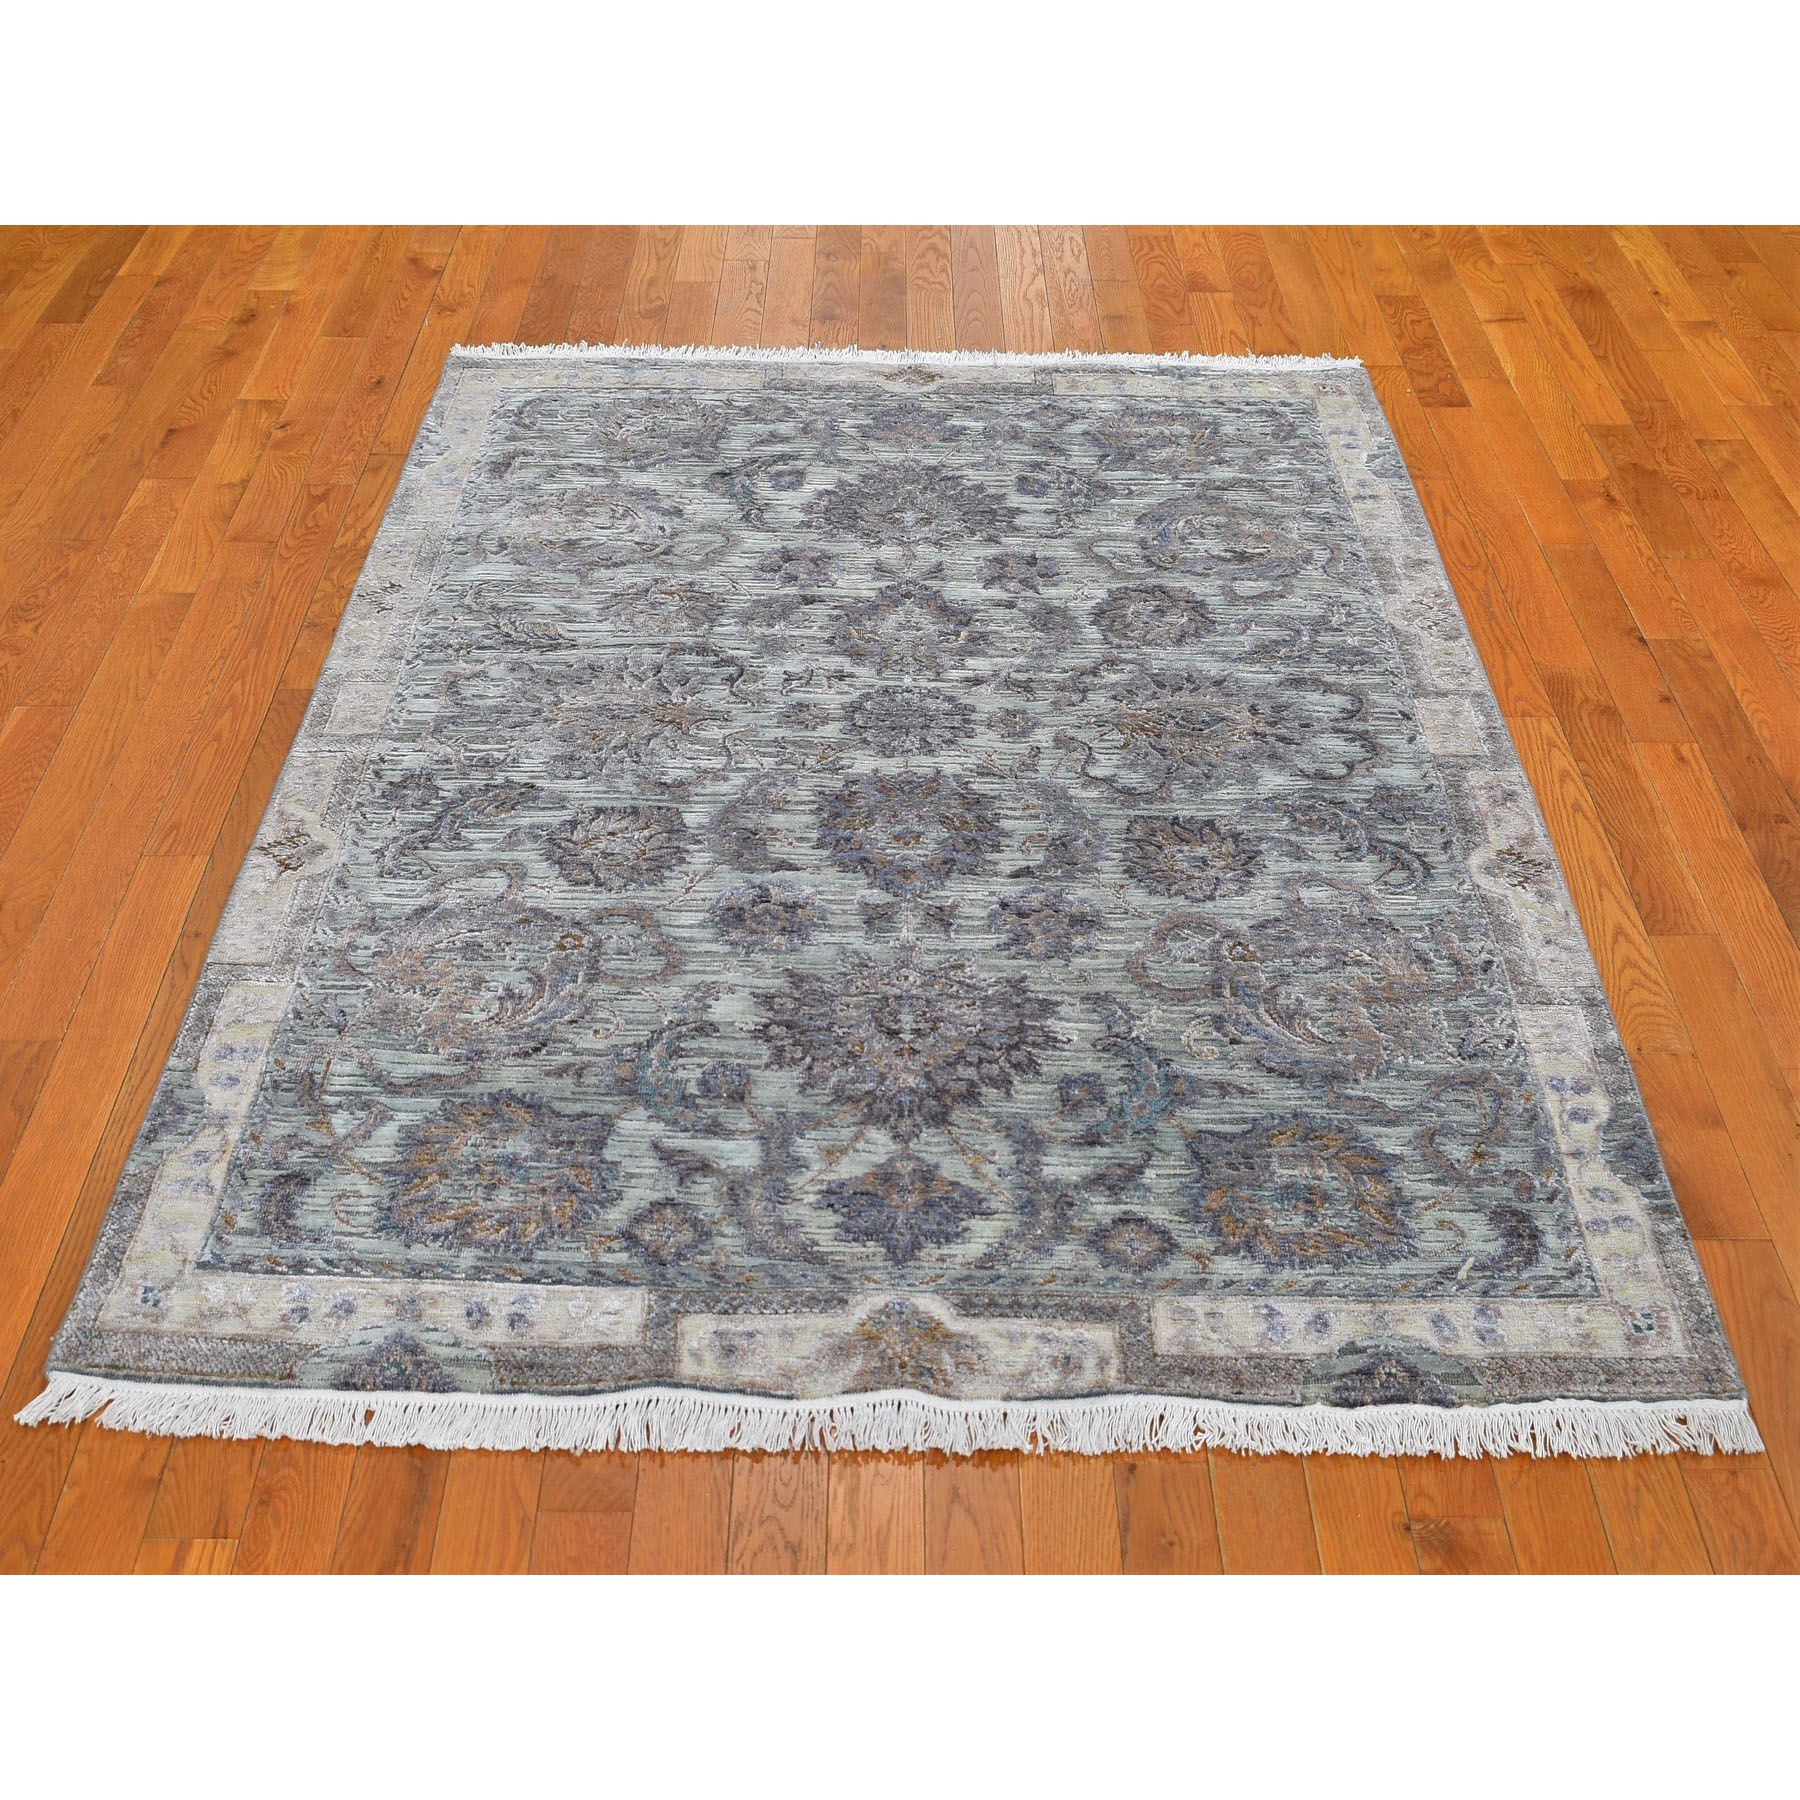 8-2 x10-2  Light Green Pure Silk With Textured Wool Mughal Design Hand Knotted Oriental Rug 